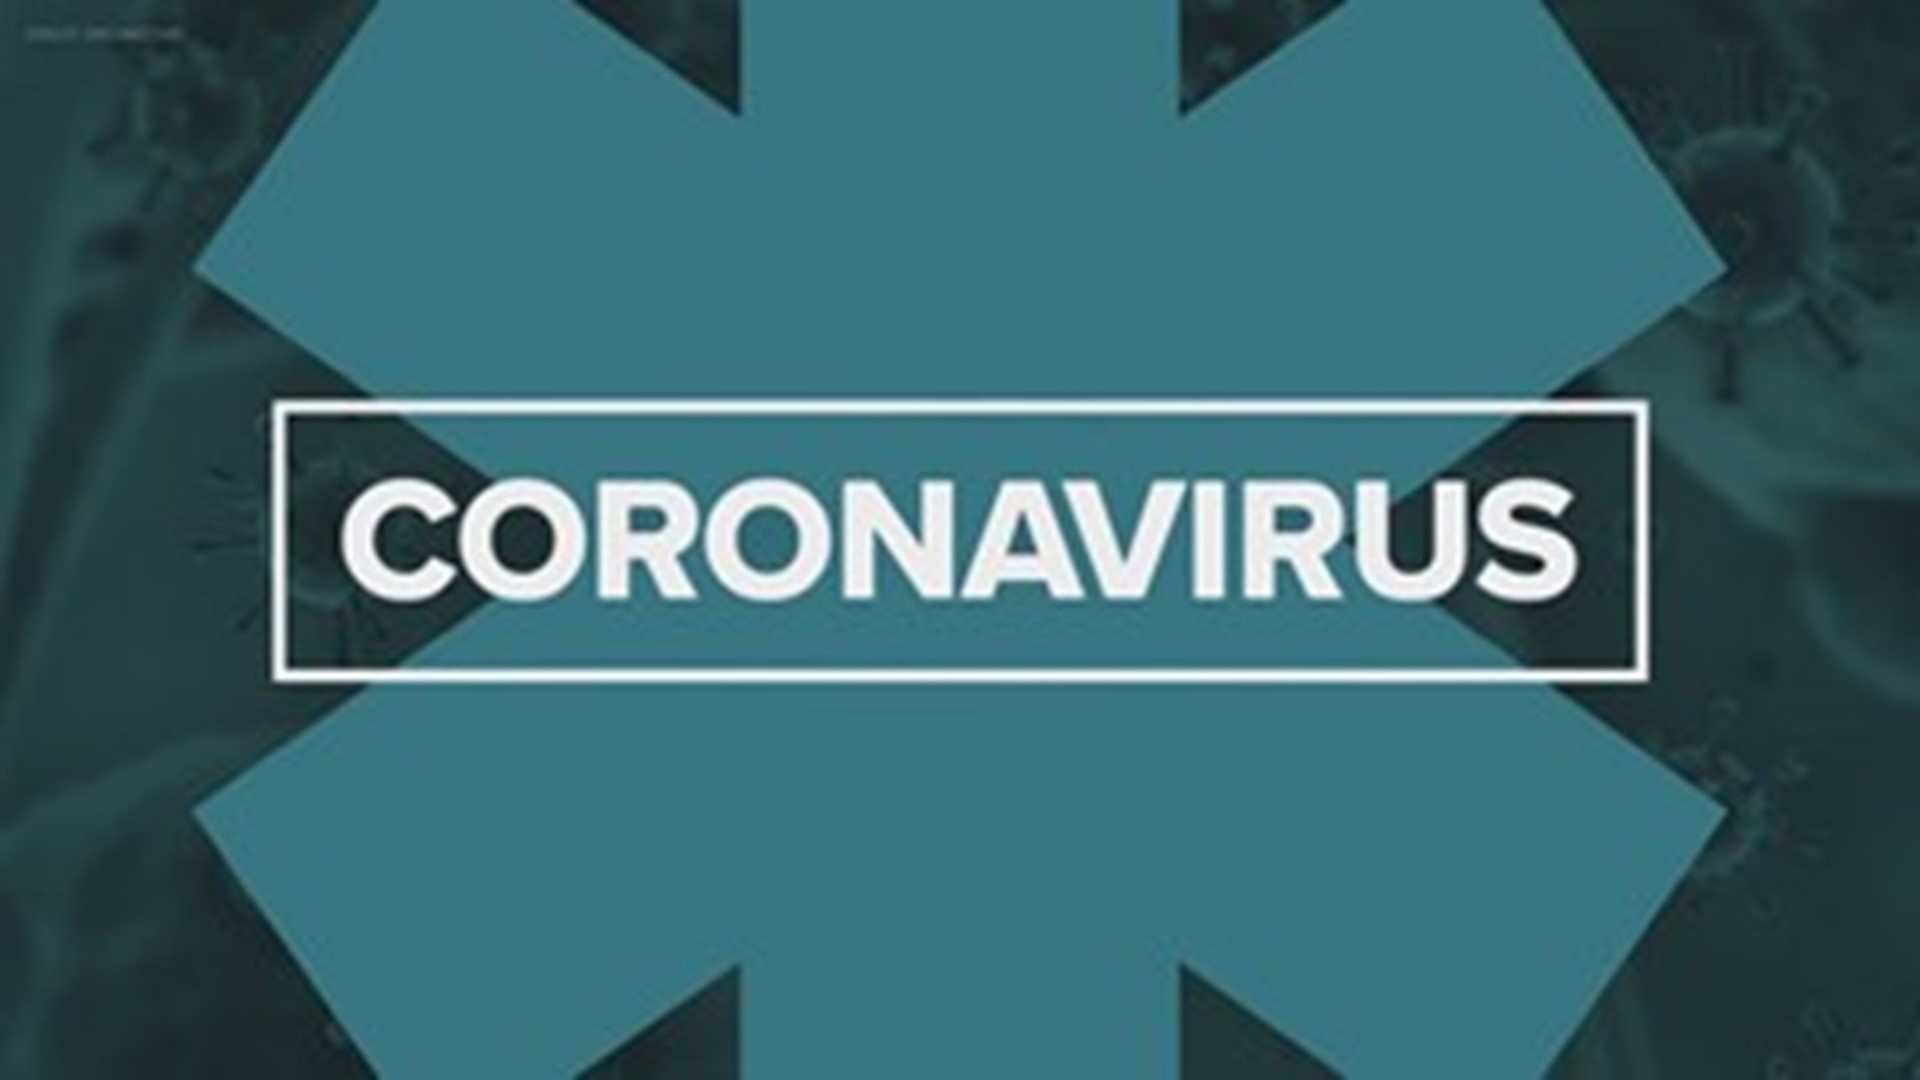 Indiana coronavirus updates: Many schools dropping mask mandates, Americans cautious ahead of holiday gatherings — 11/16/2021 noon update